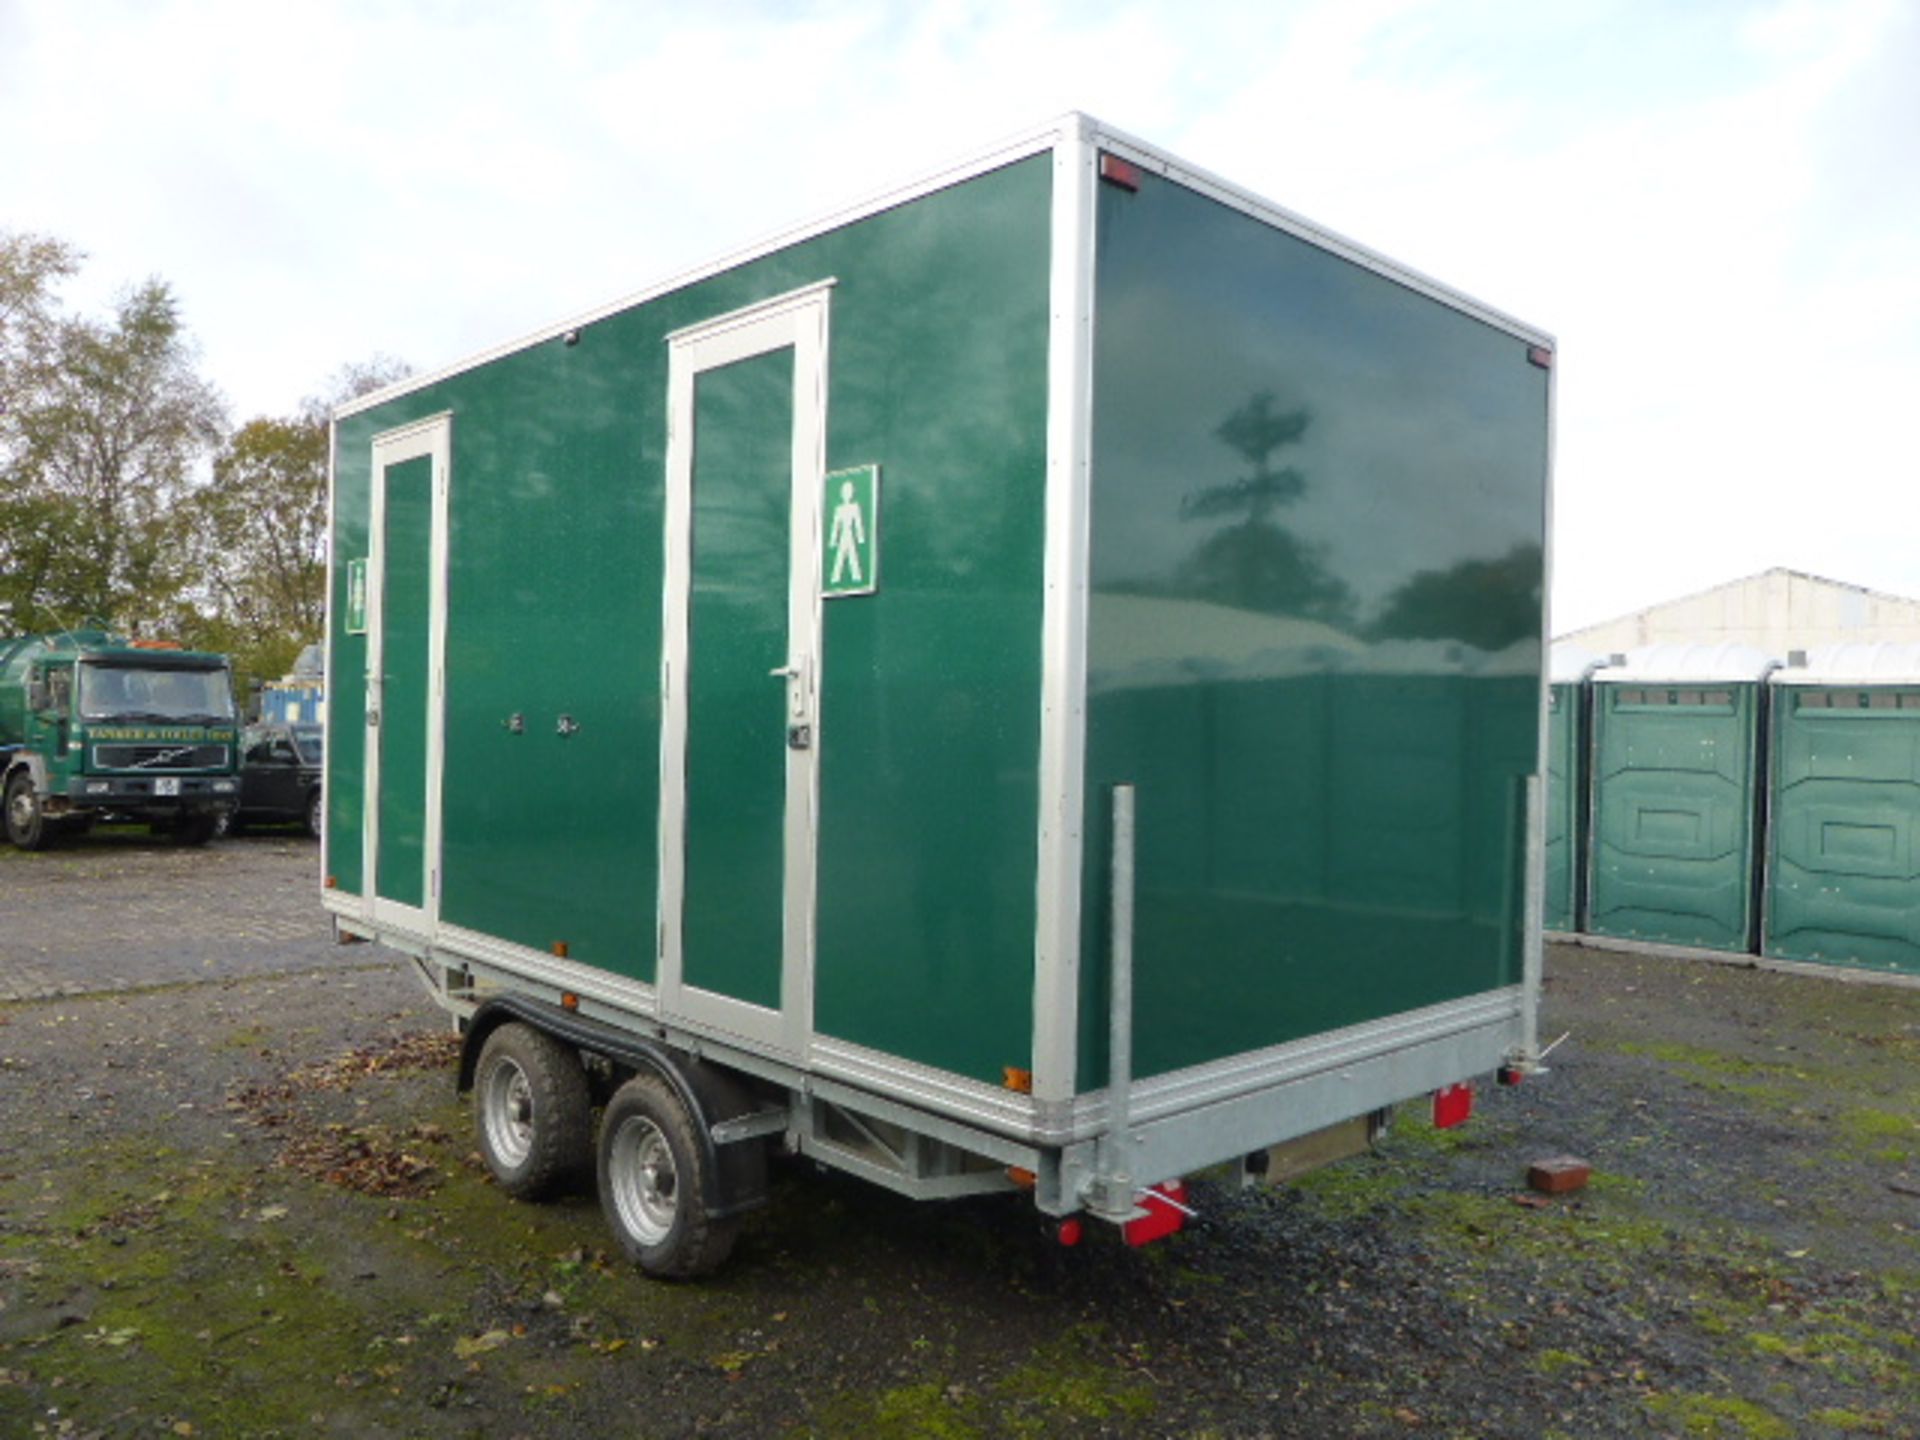 Wiltshire  luxury 2 +1 toilet trailer by Premier Mobile twin axle with recirculation unit -Year - Image 19 of 26